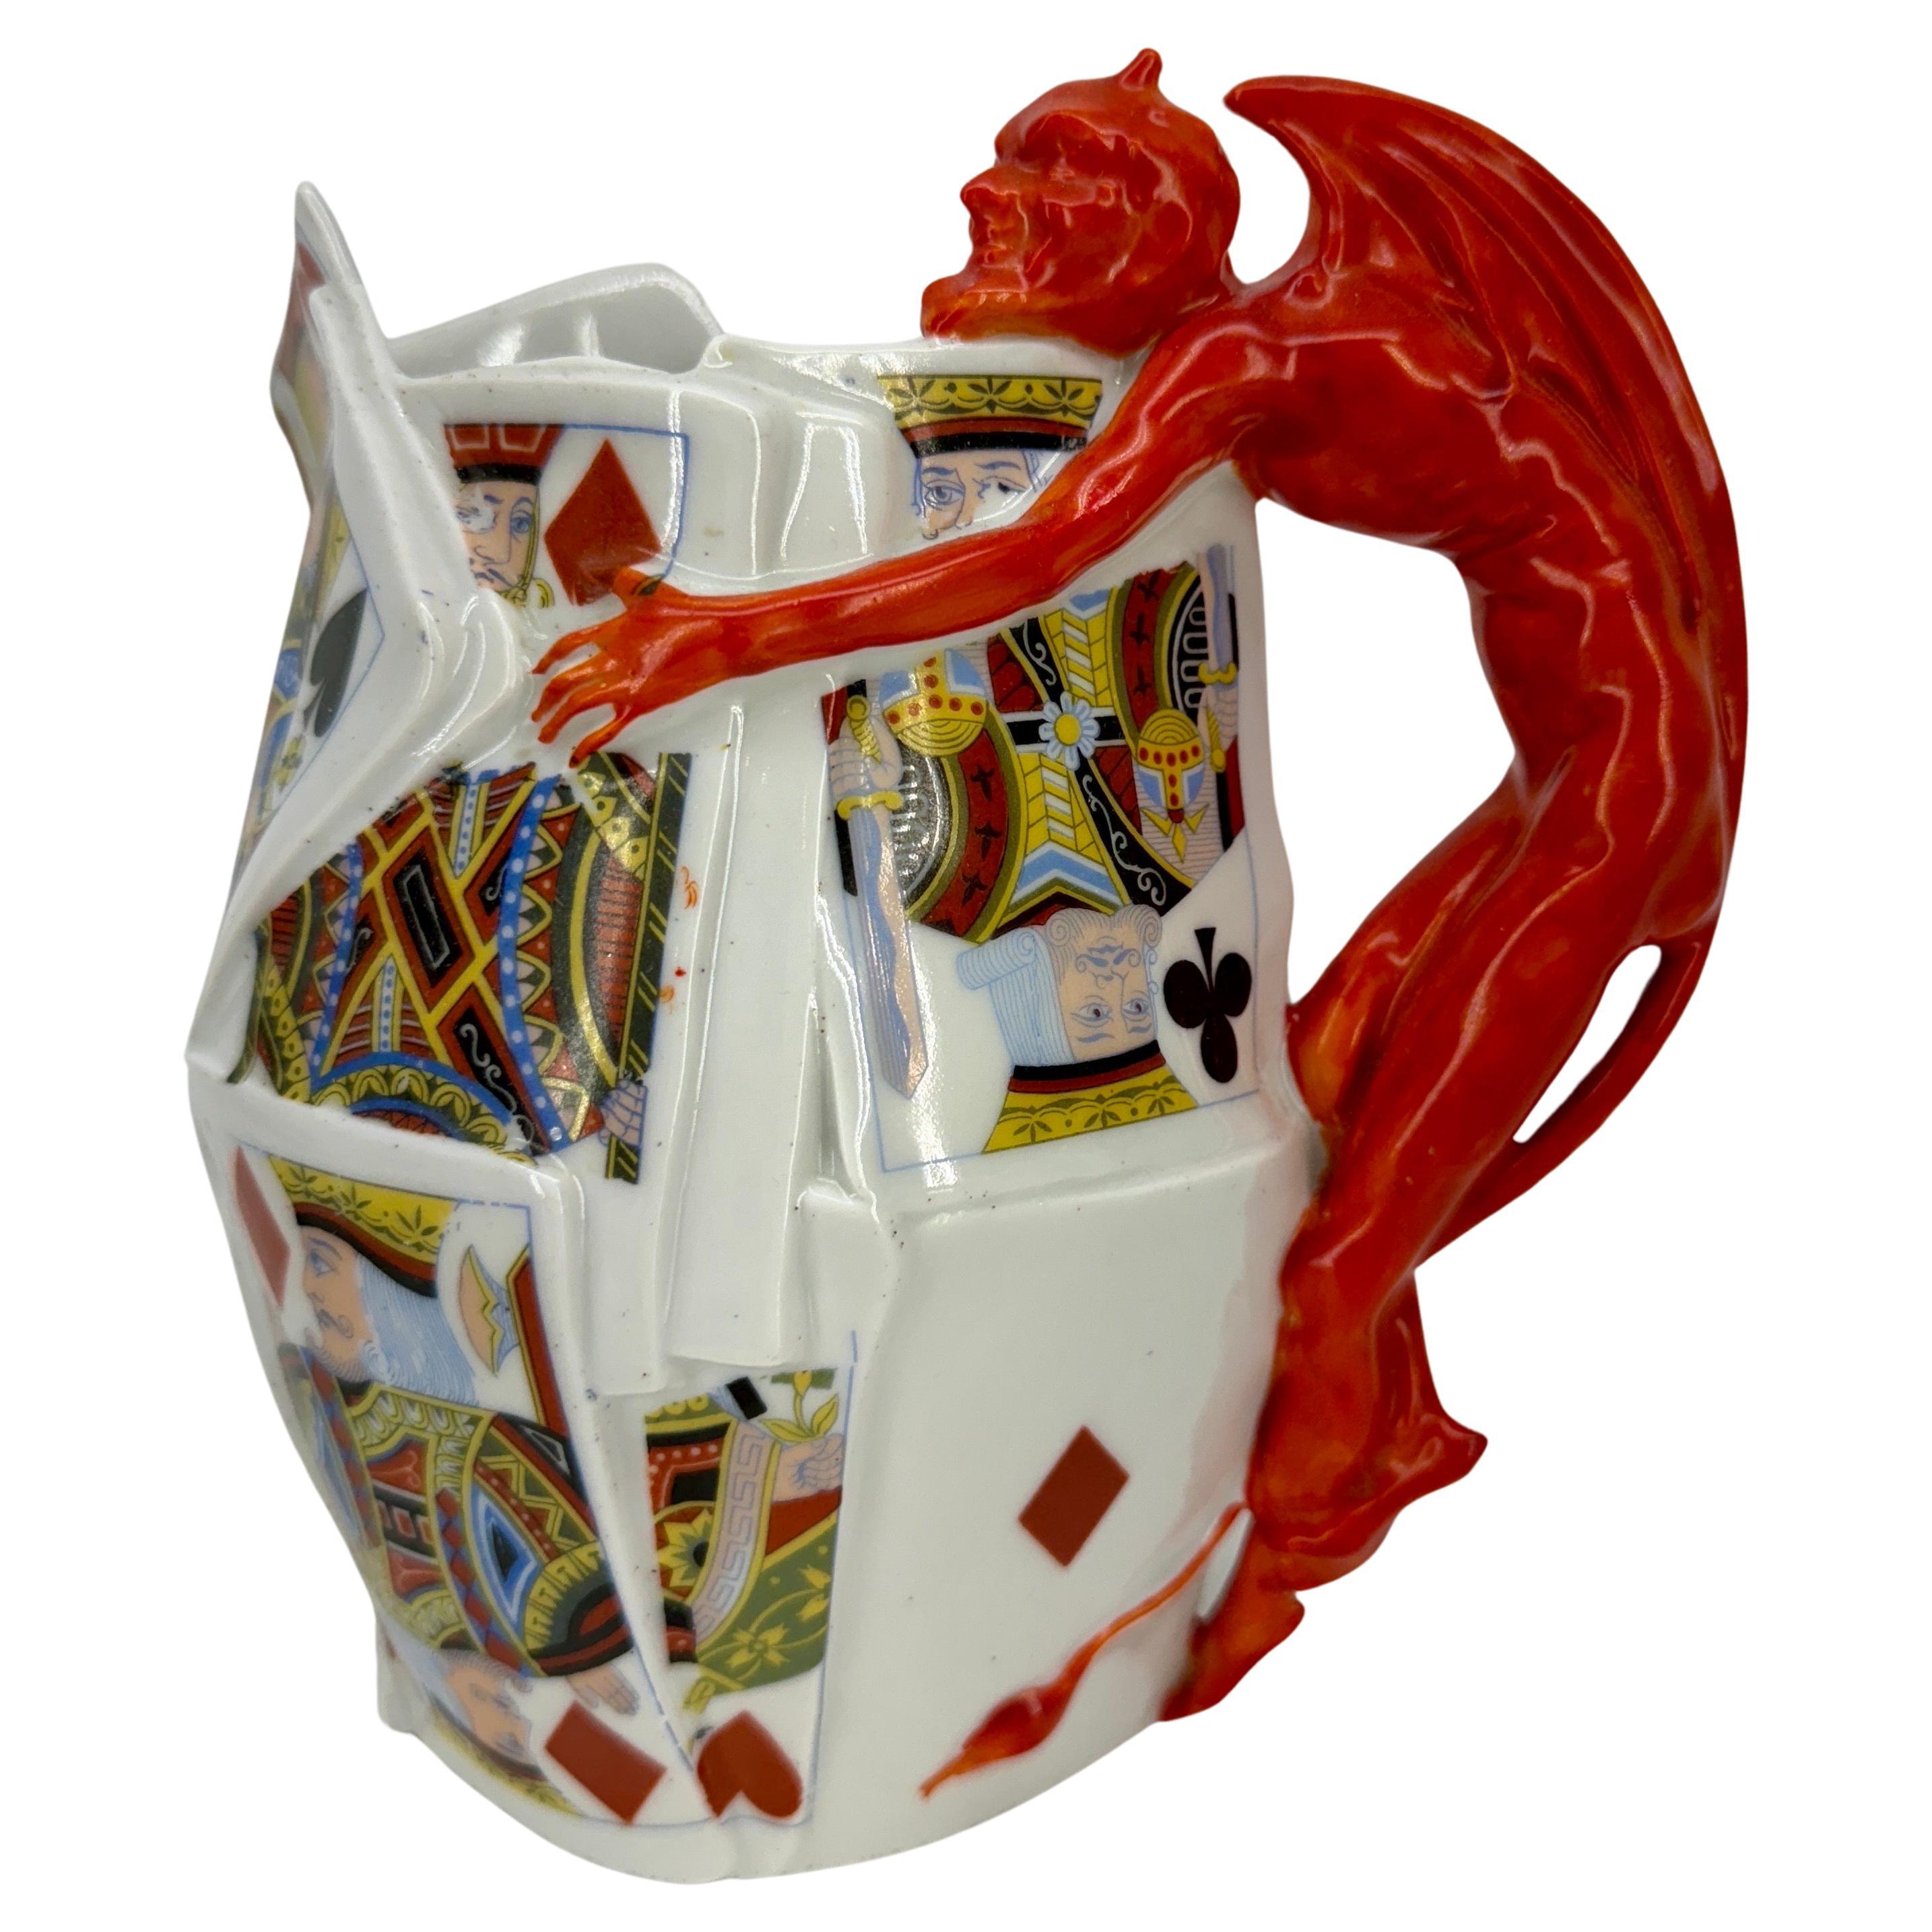 Super decorative set of German Royal Bayreuth Porcelain Jug and Jar Devil Cards

This Royal Bayreuth Pitcher and Lidded Jar is part of the Devil and Cards series and is known to be symbolic as it was considered a sin to play cards and gamble. This